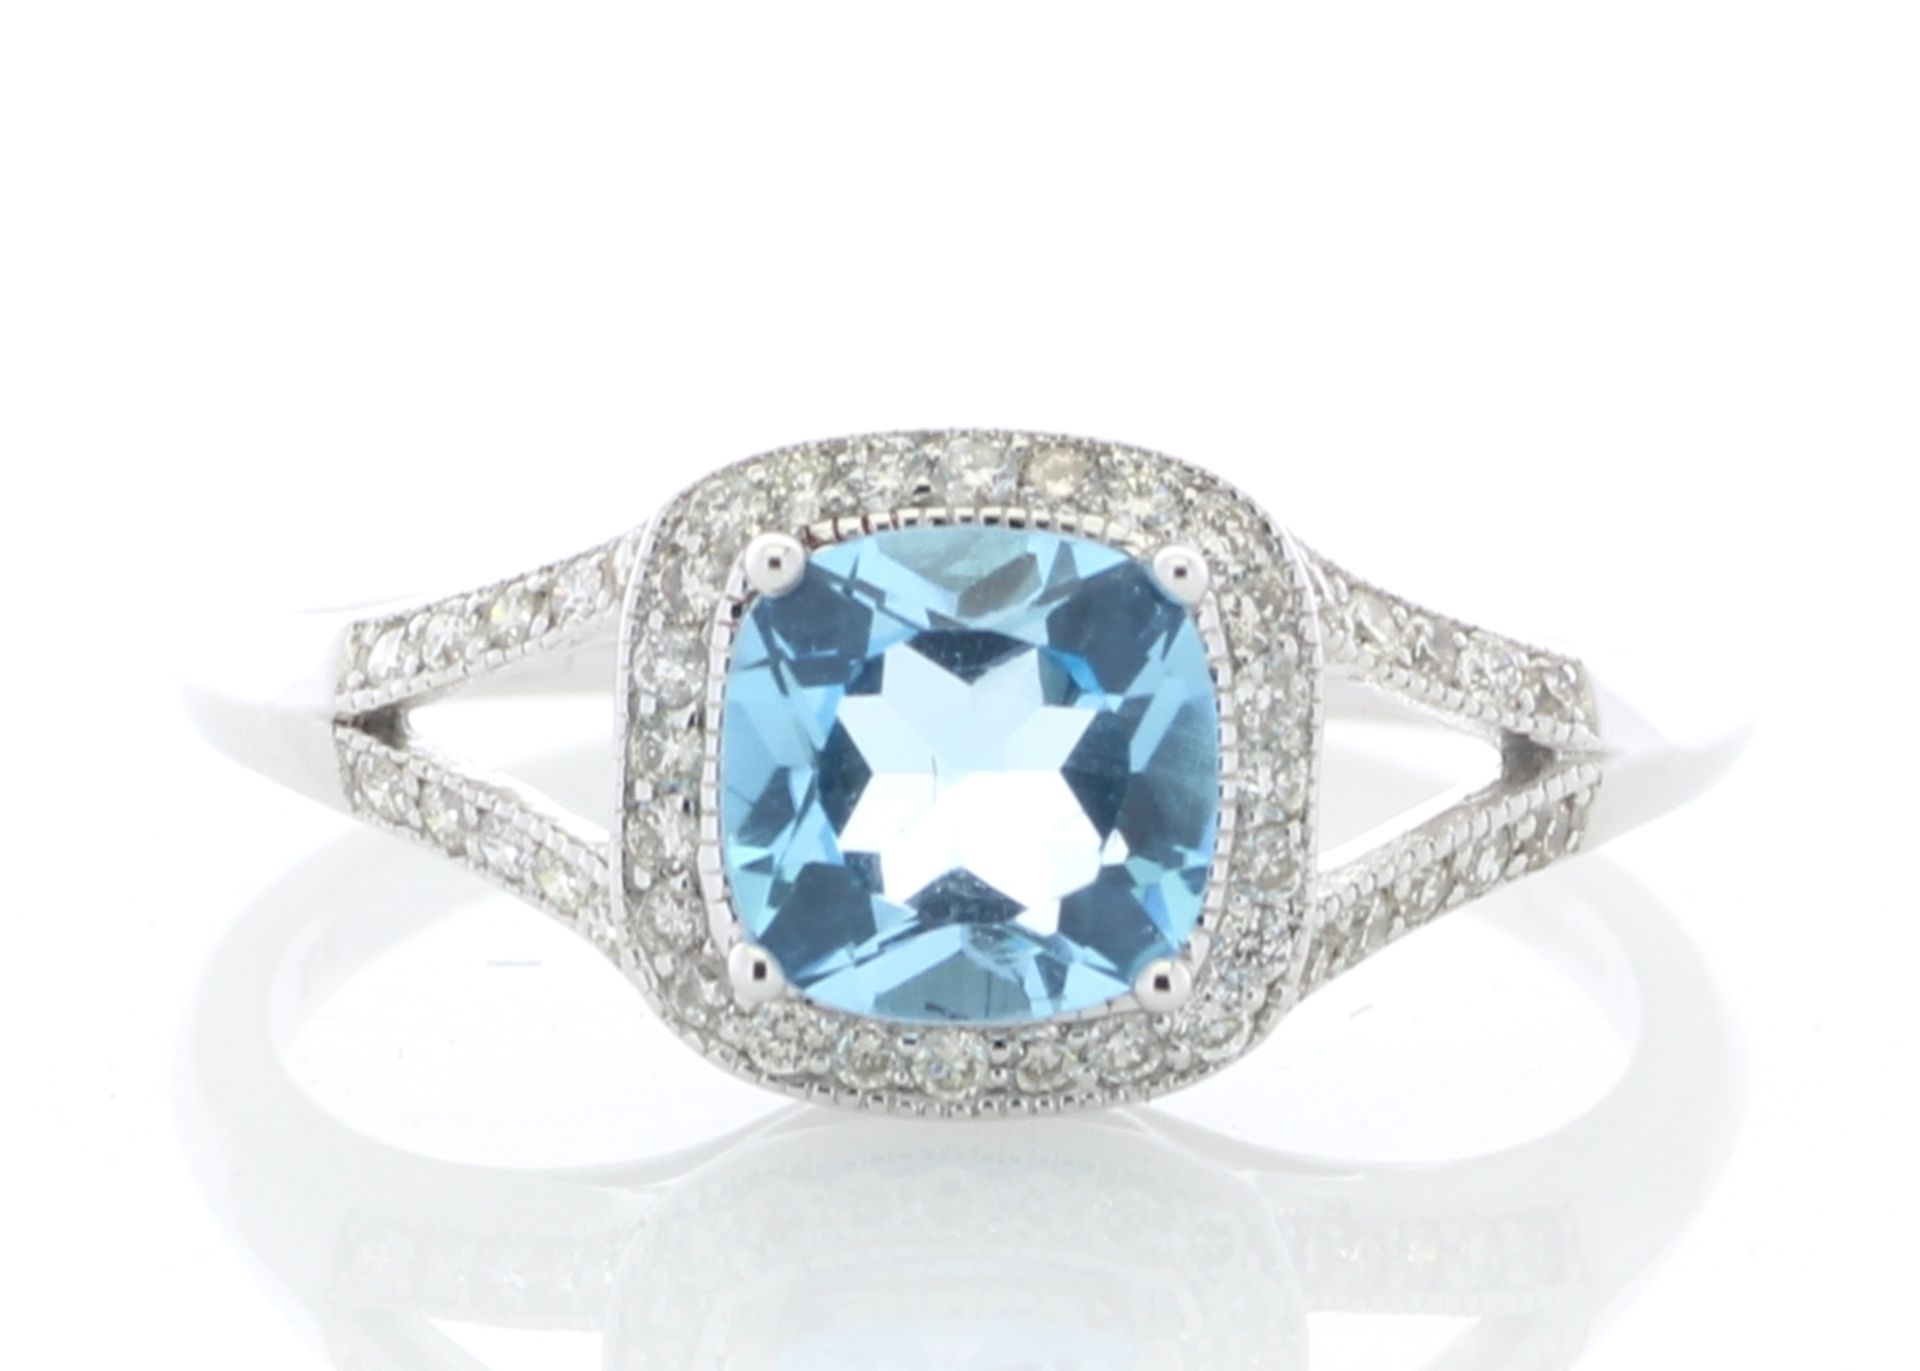 9ct White Gold Blue Topaz And Diamond Ring 0.22 Carats - Valued by GIE £2,695.00 - 9ct White Gold